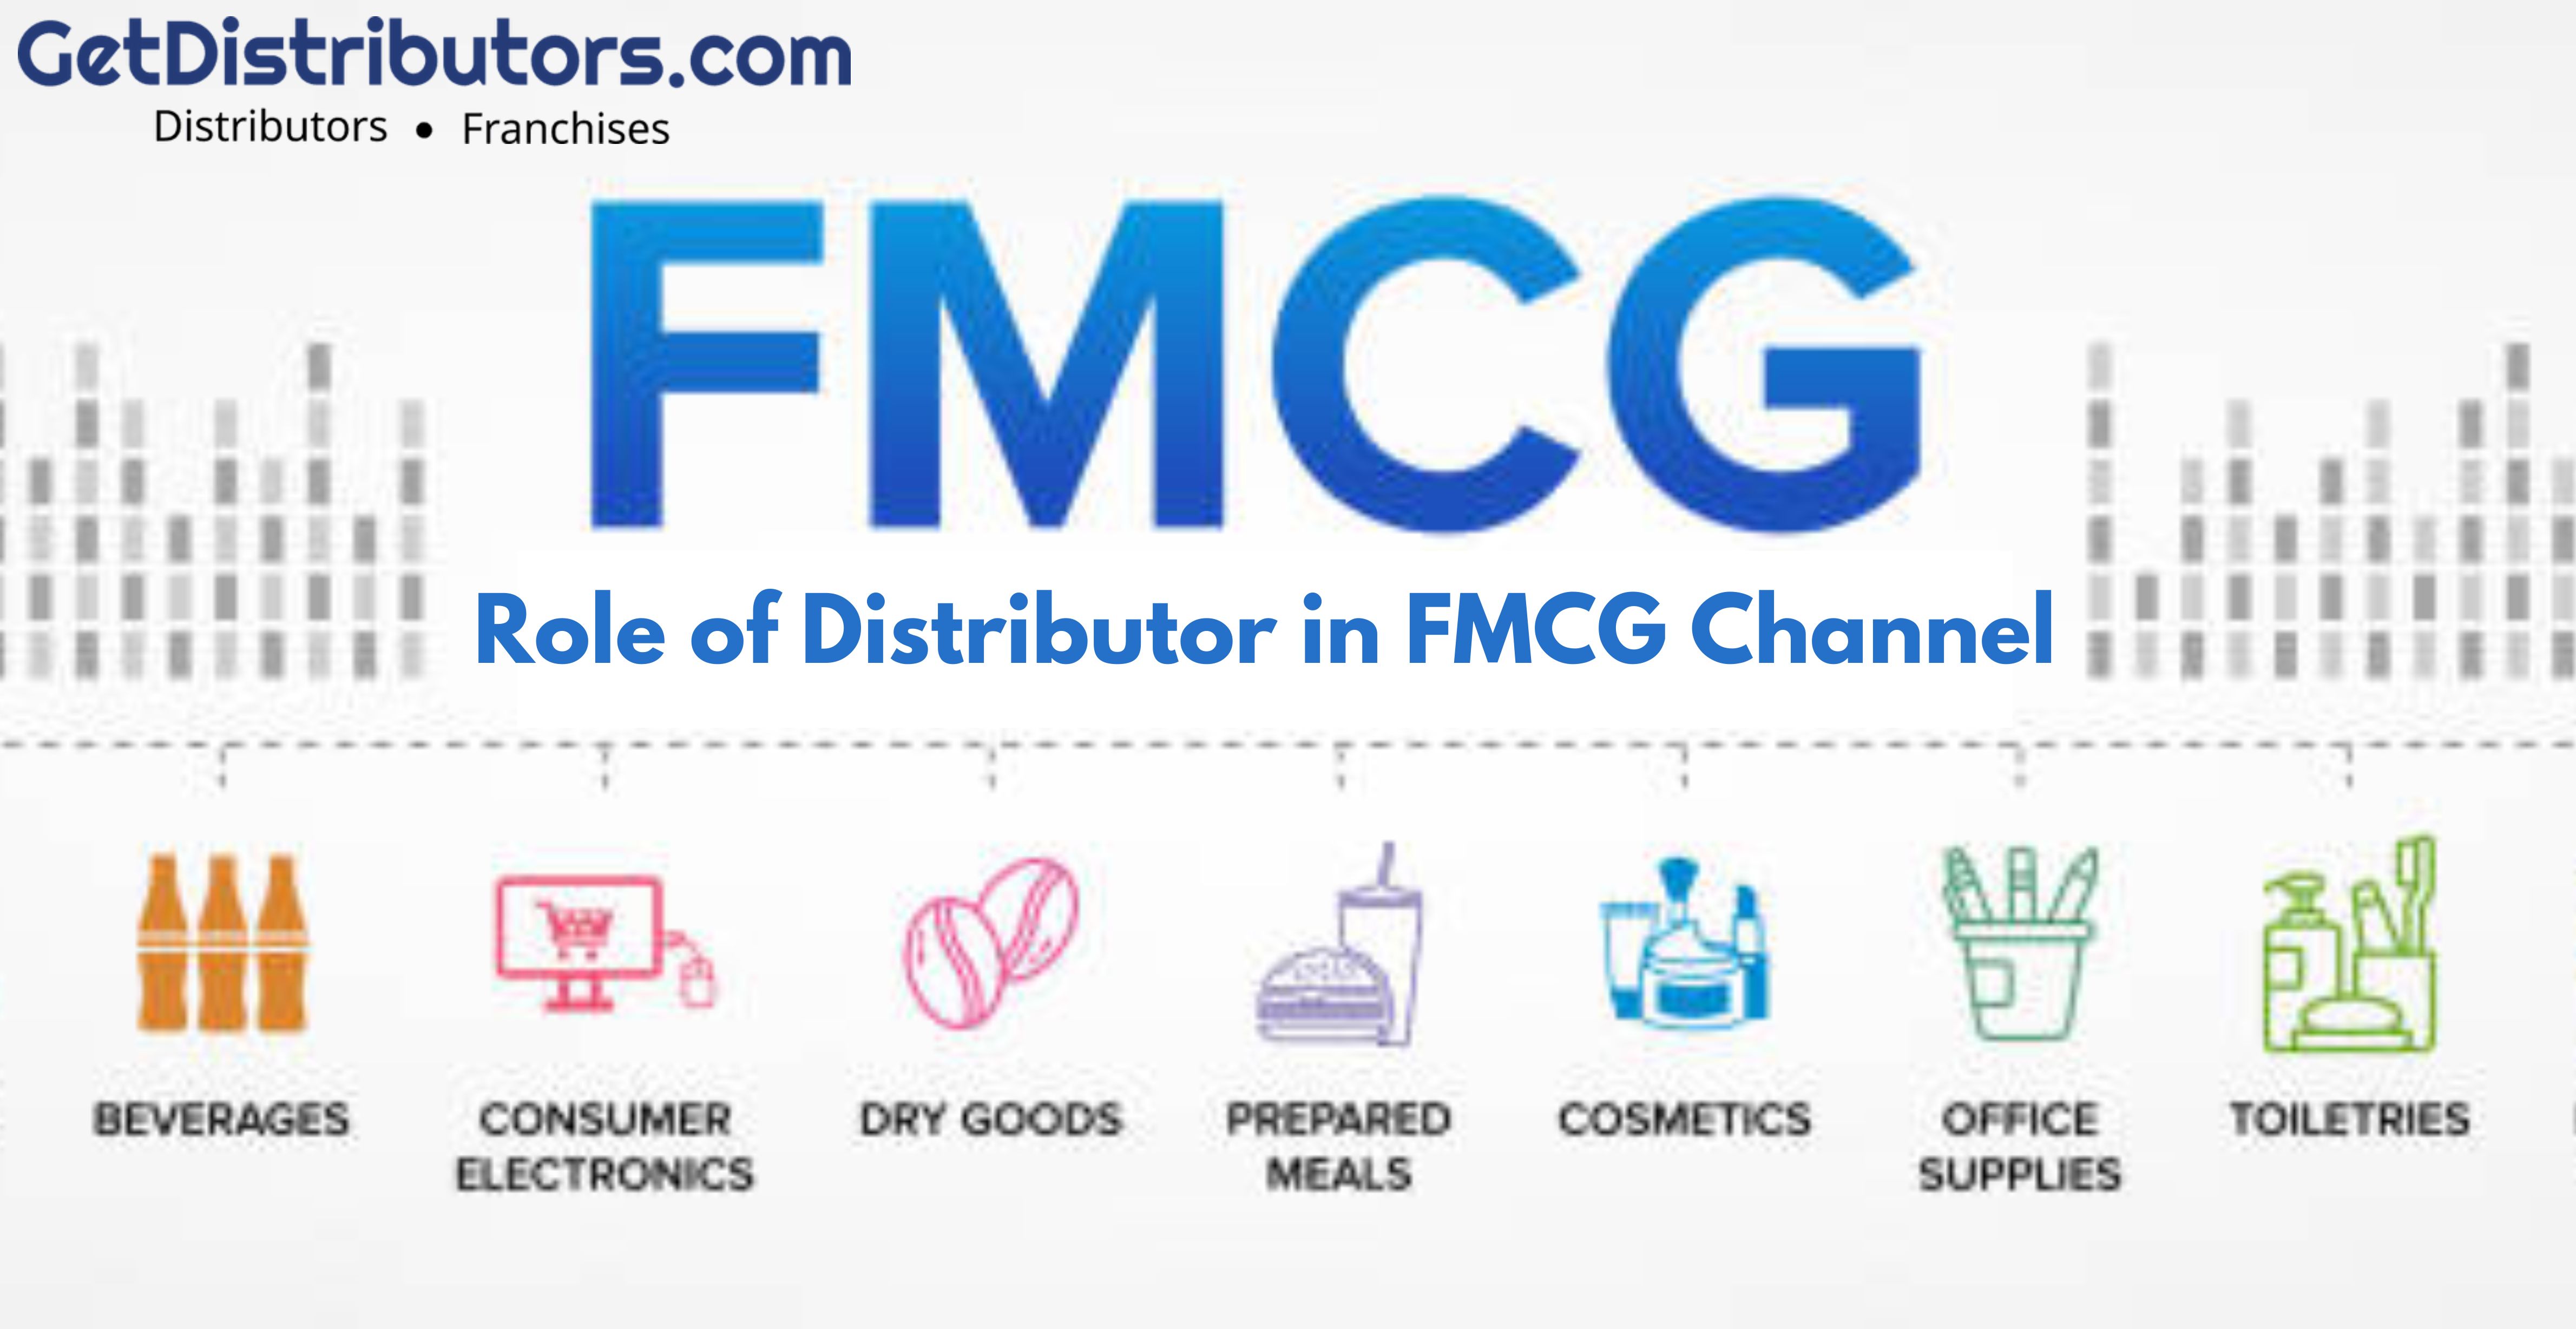 Role of Distributor in FMCG Channel